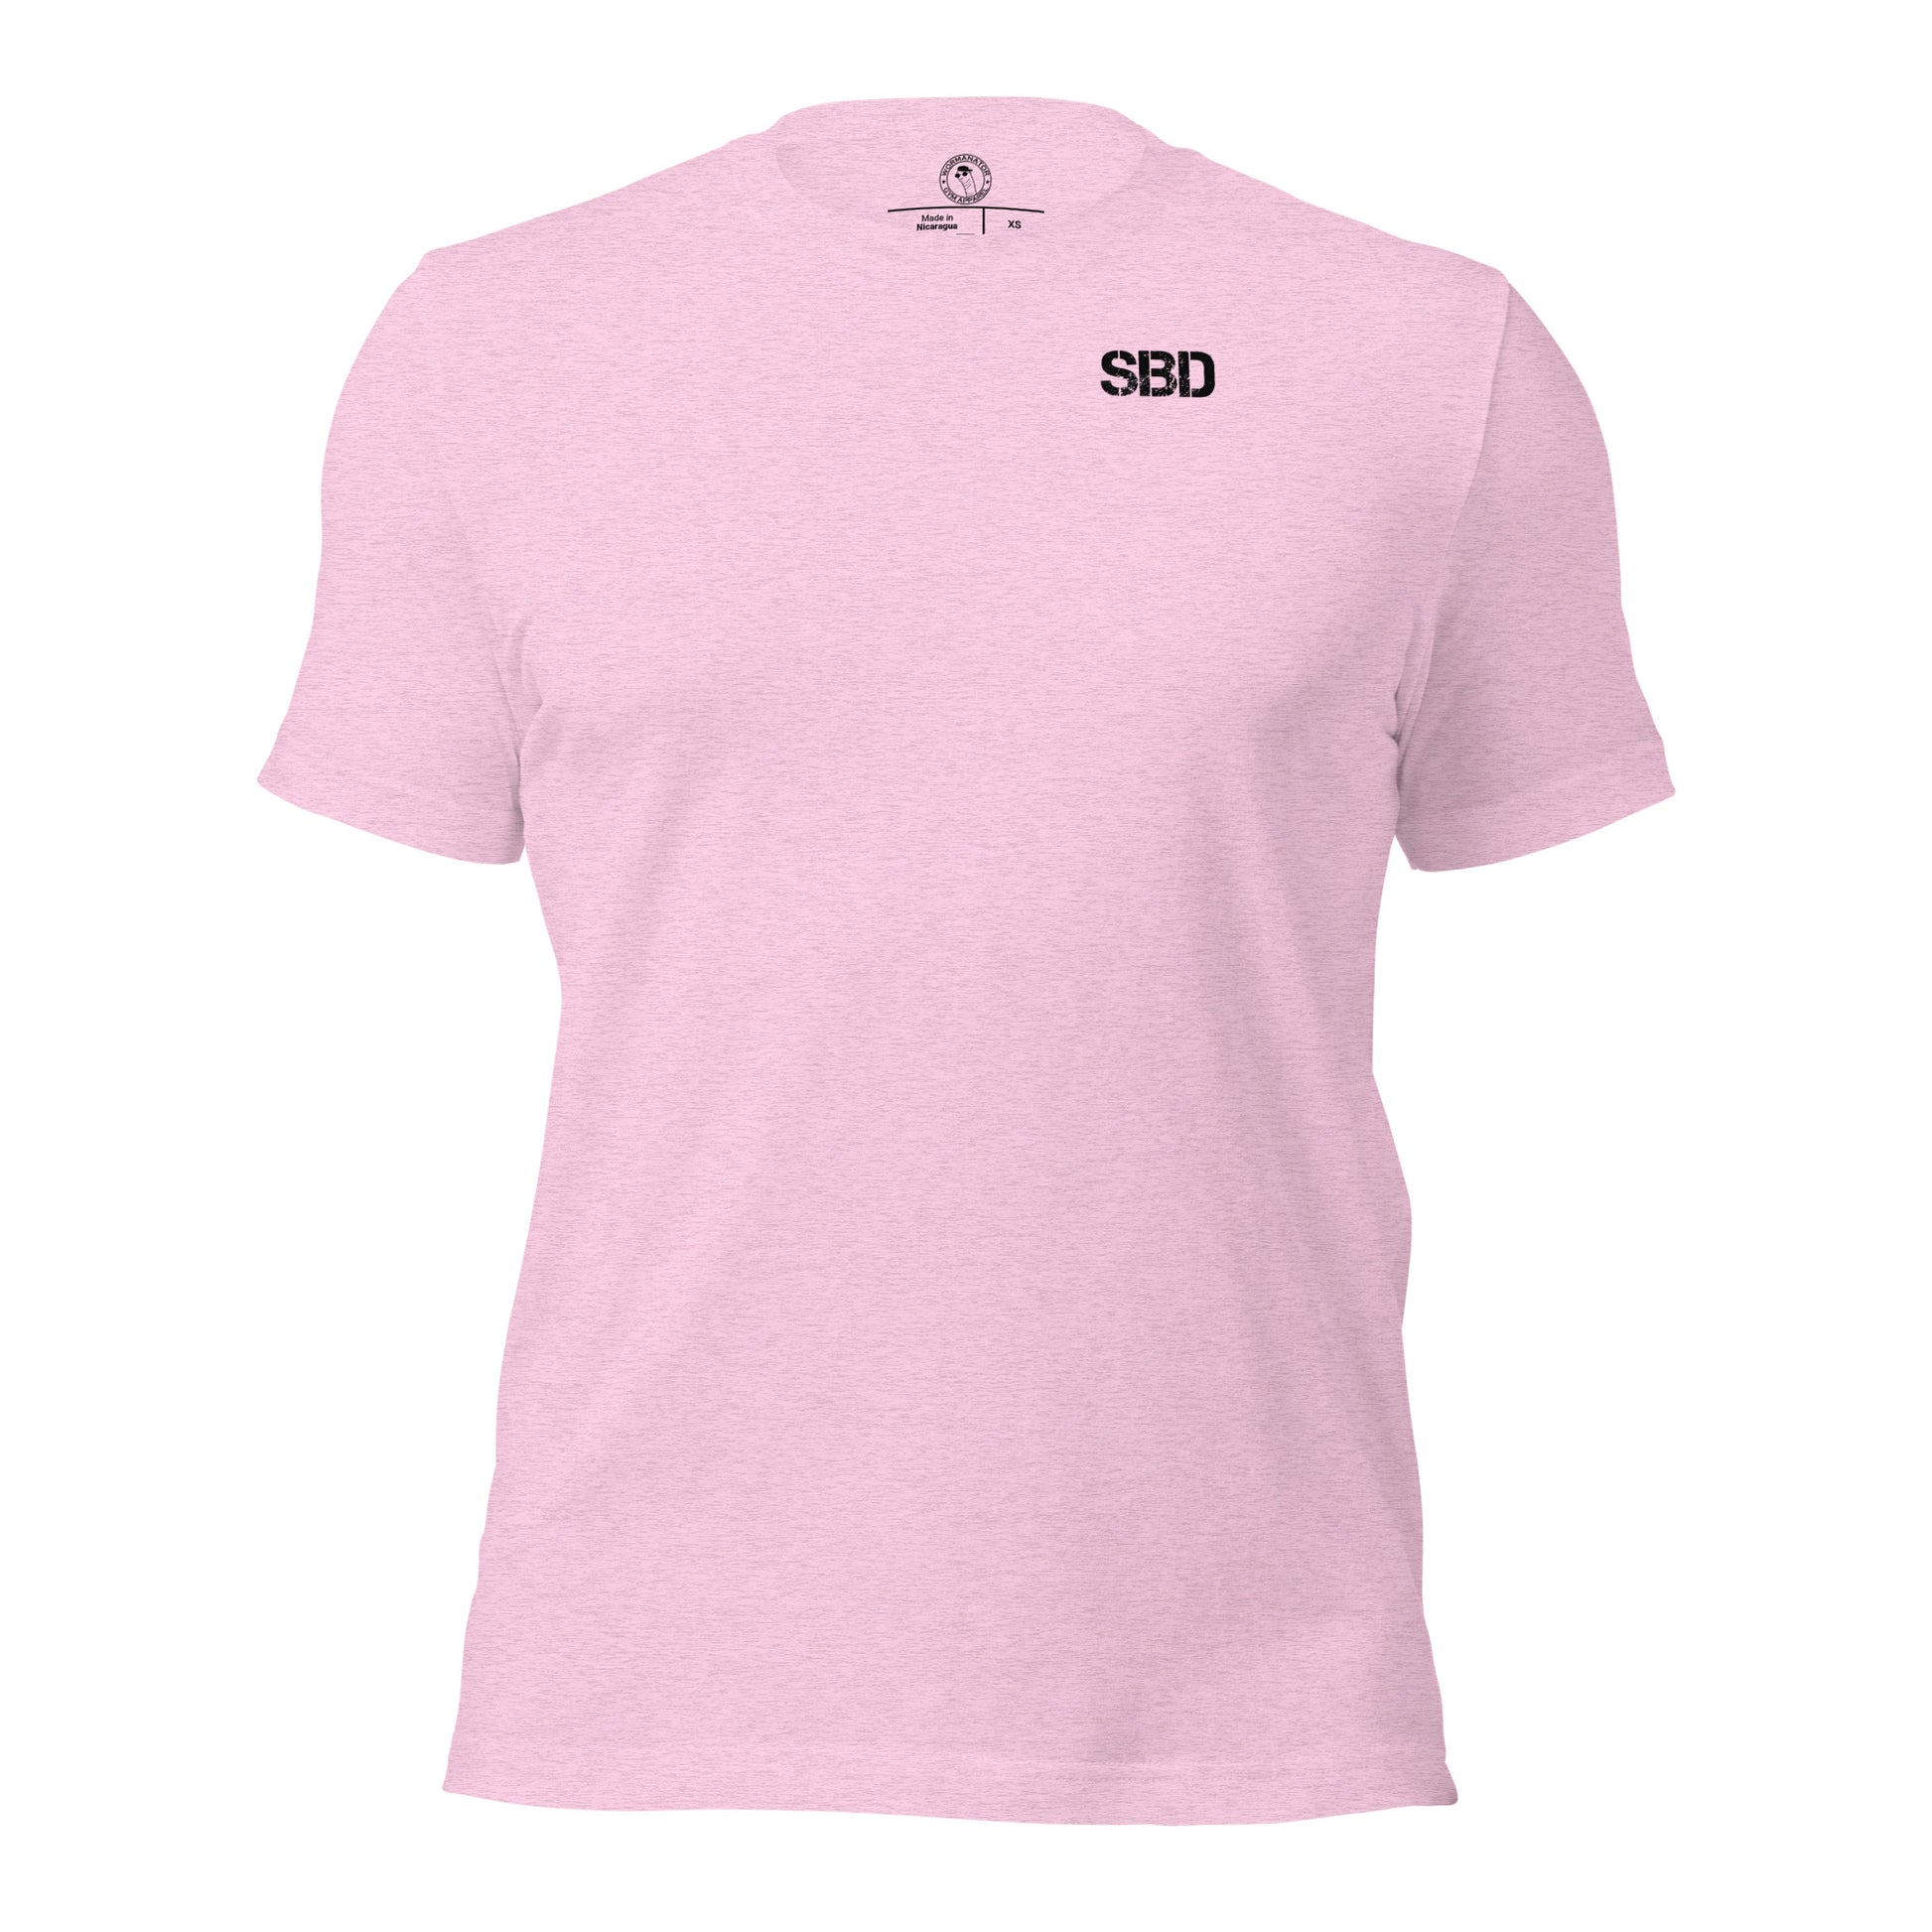 Squat Bench Deadlift (SBD) Shirt in Heather Prism Lilac